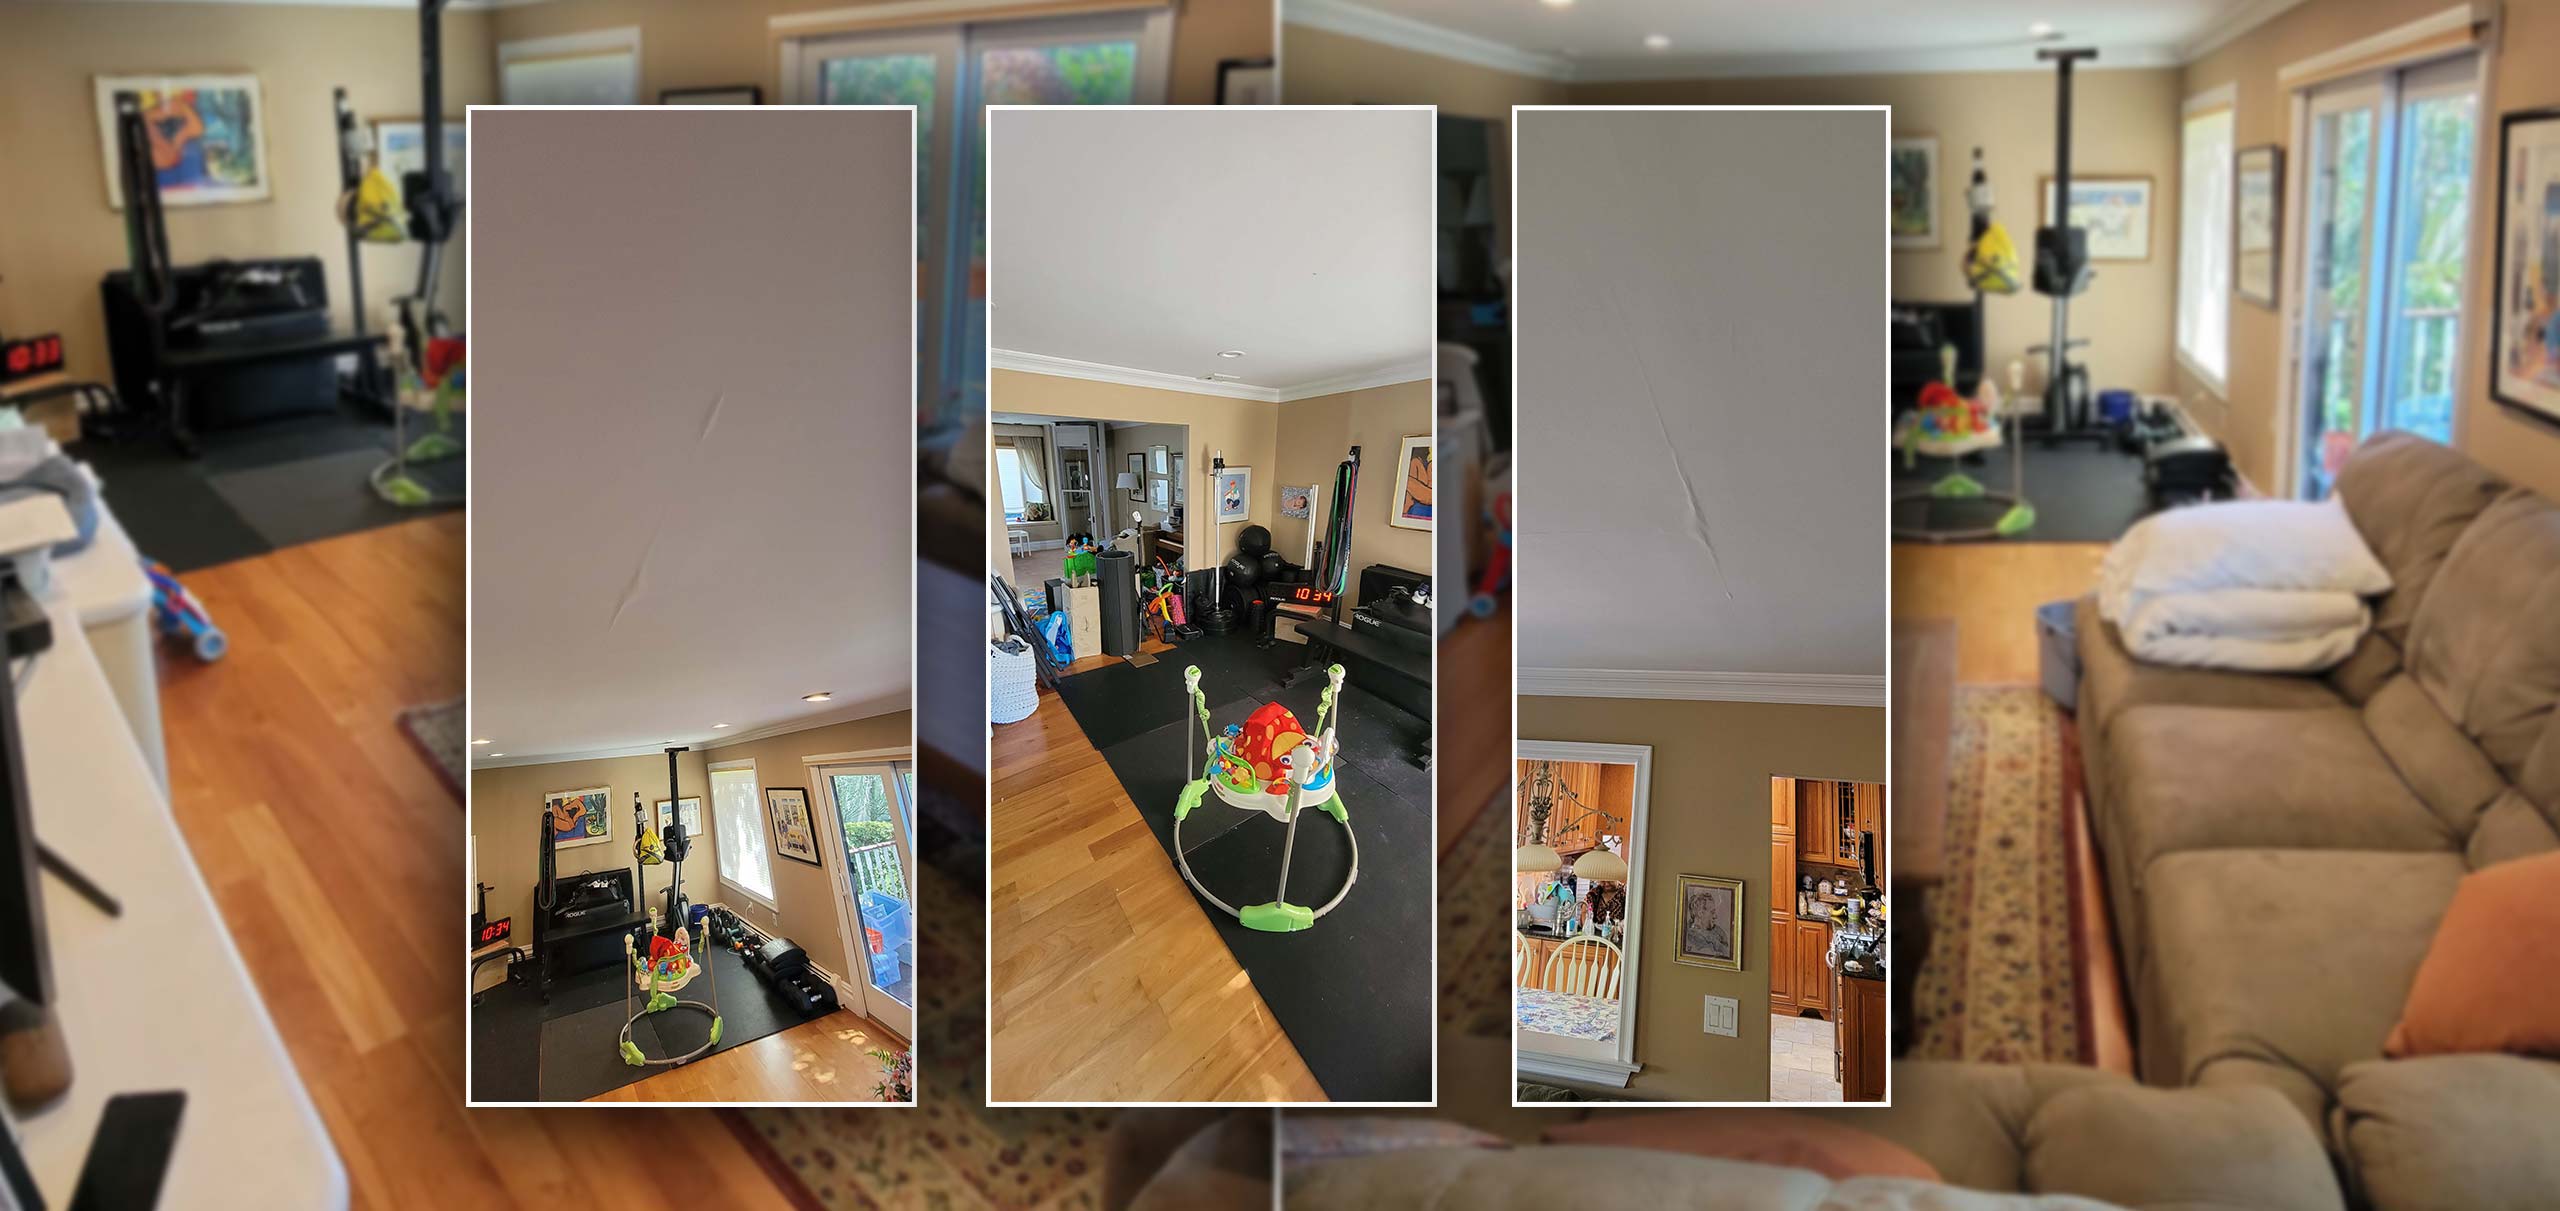 water damage in the living room dix hills ny